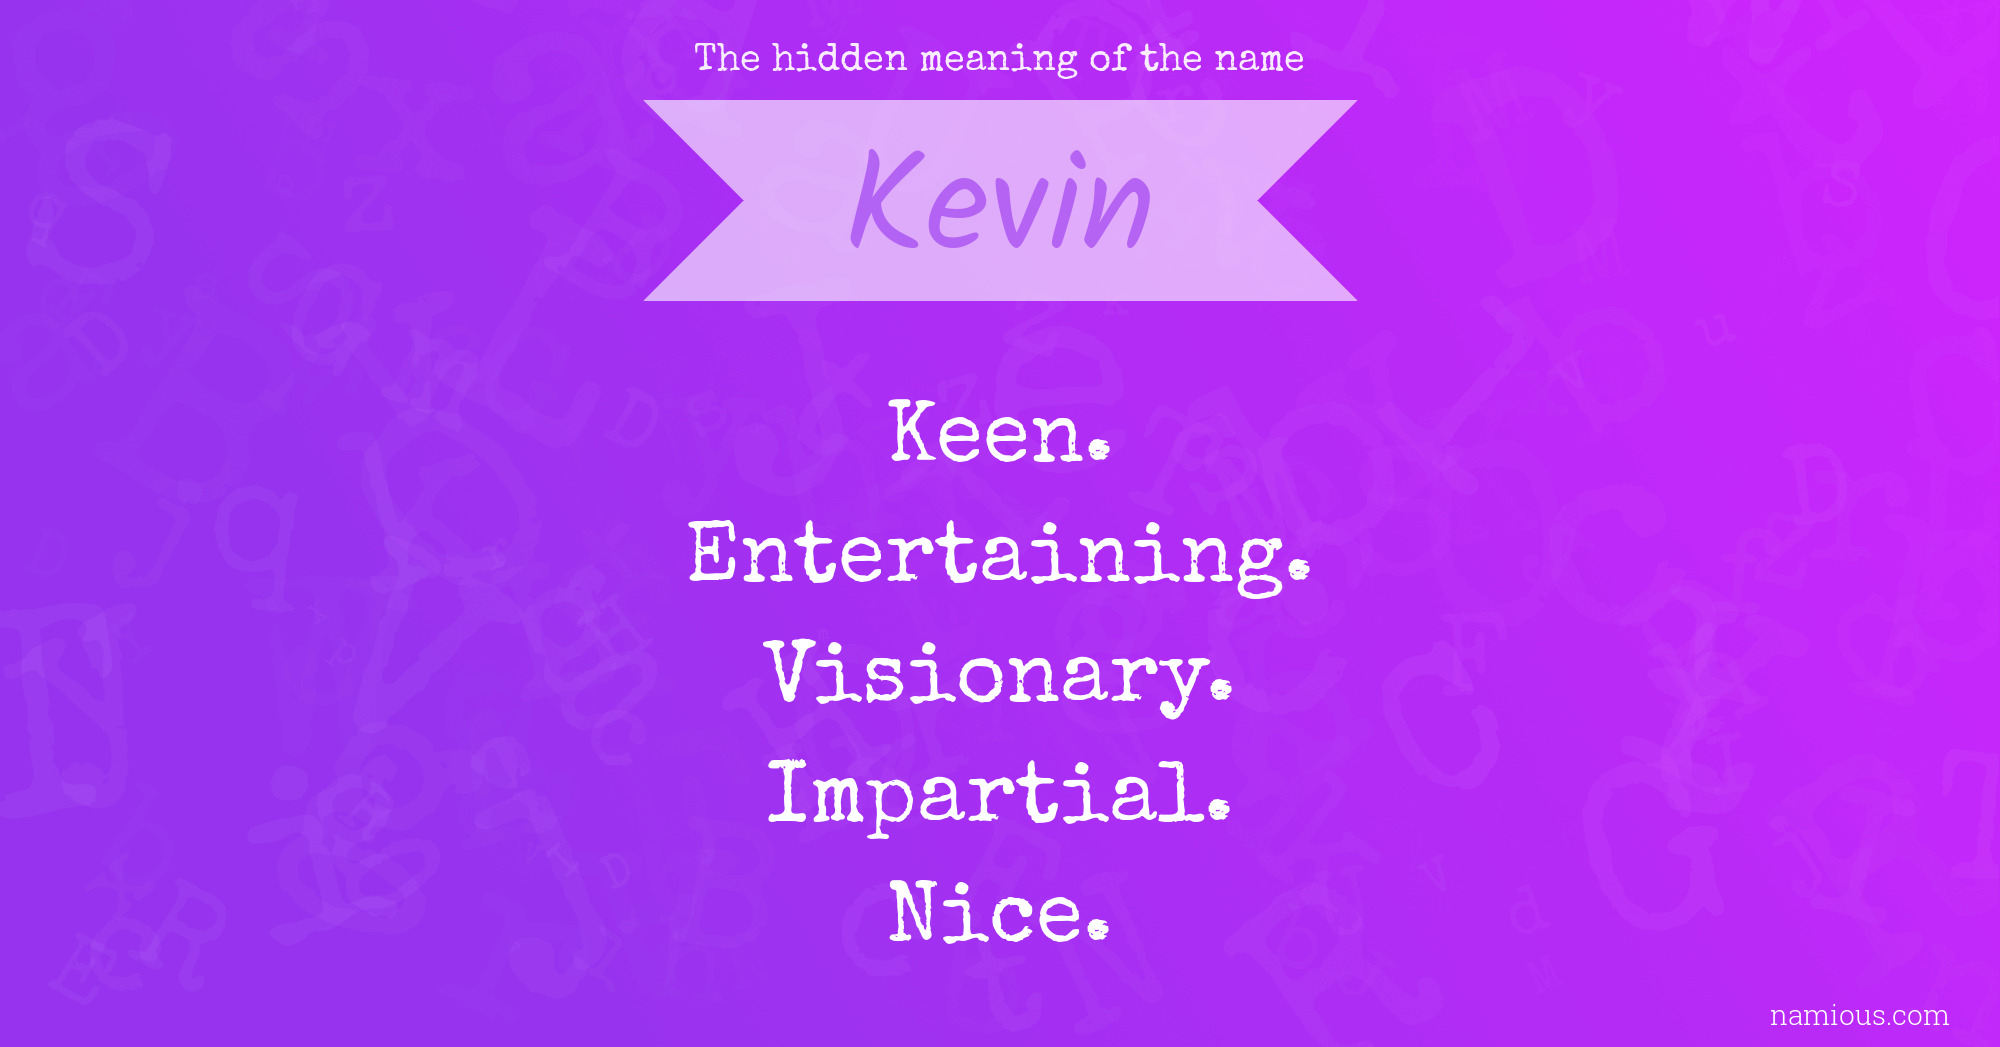 The hidden meaning of the name Kevin